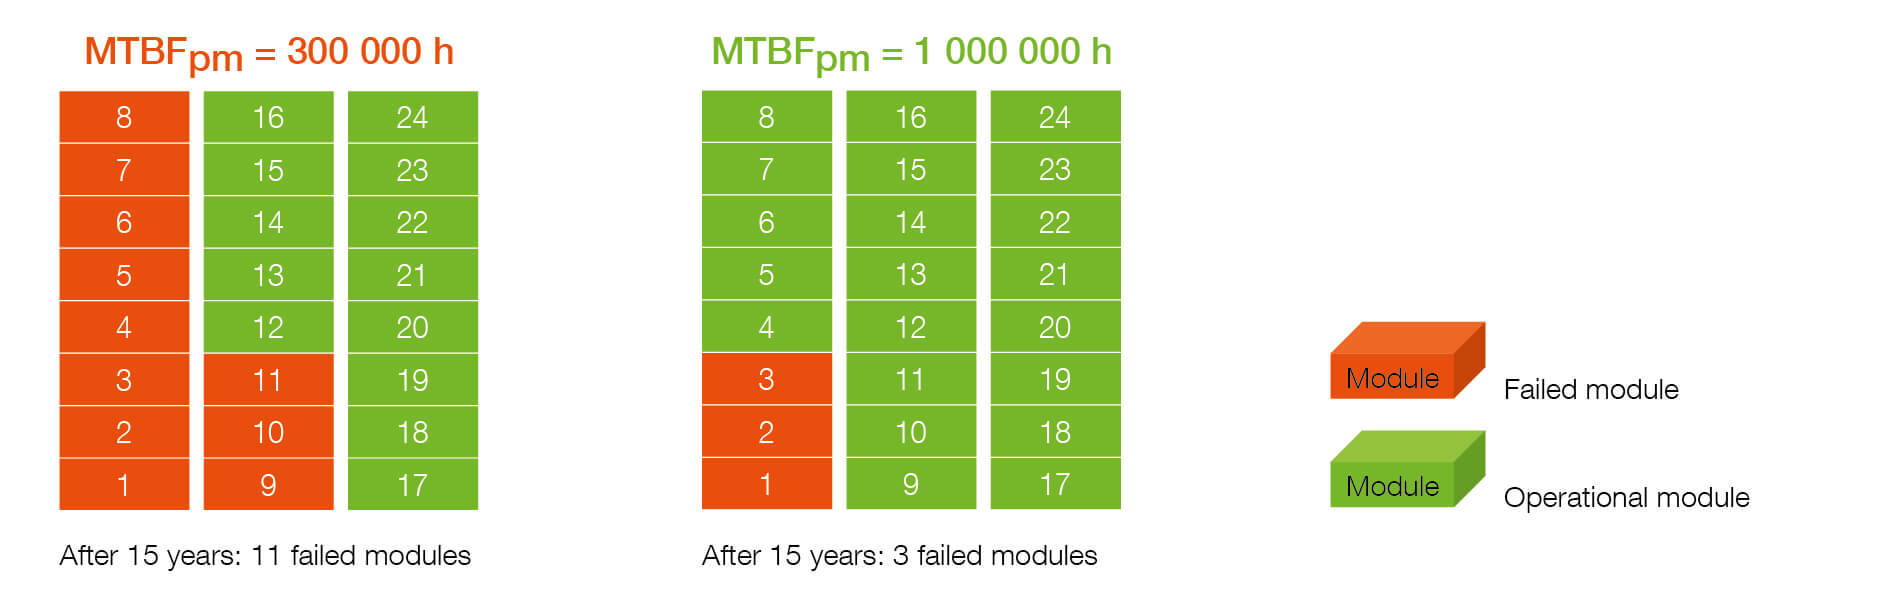 Table representing the statistical estimation of the number of power module failures in 15 years in a 24-module system